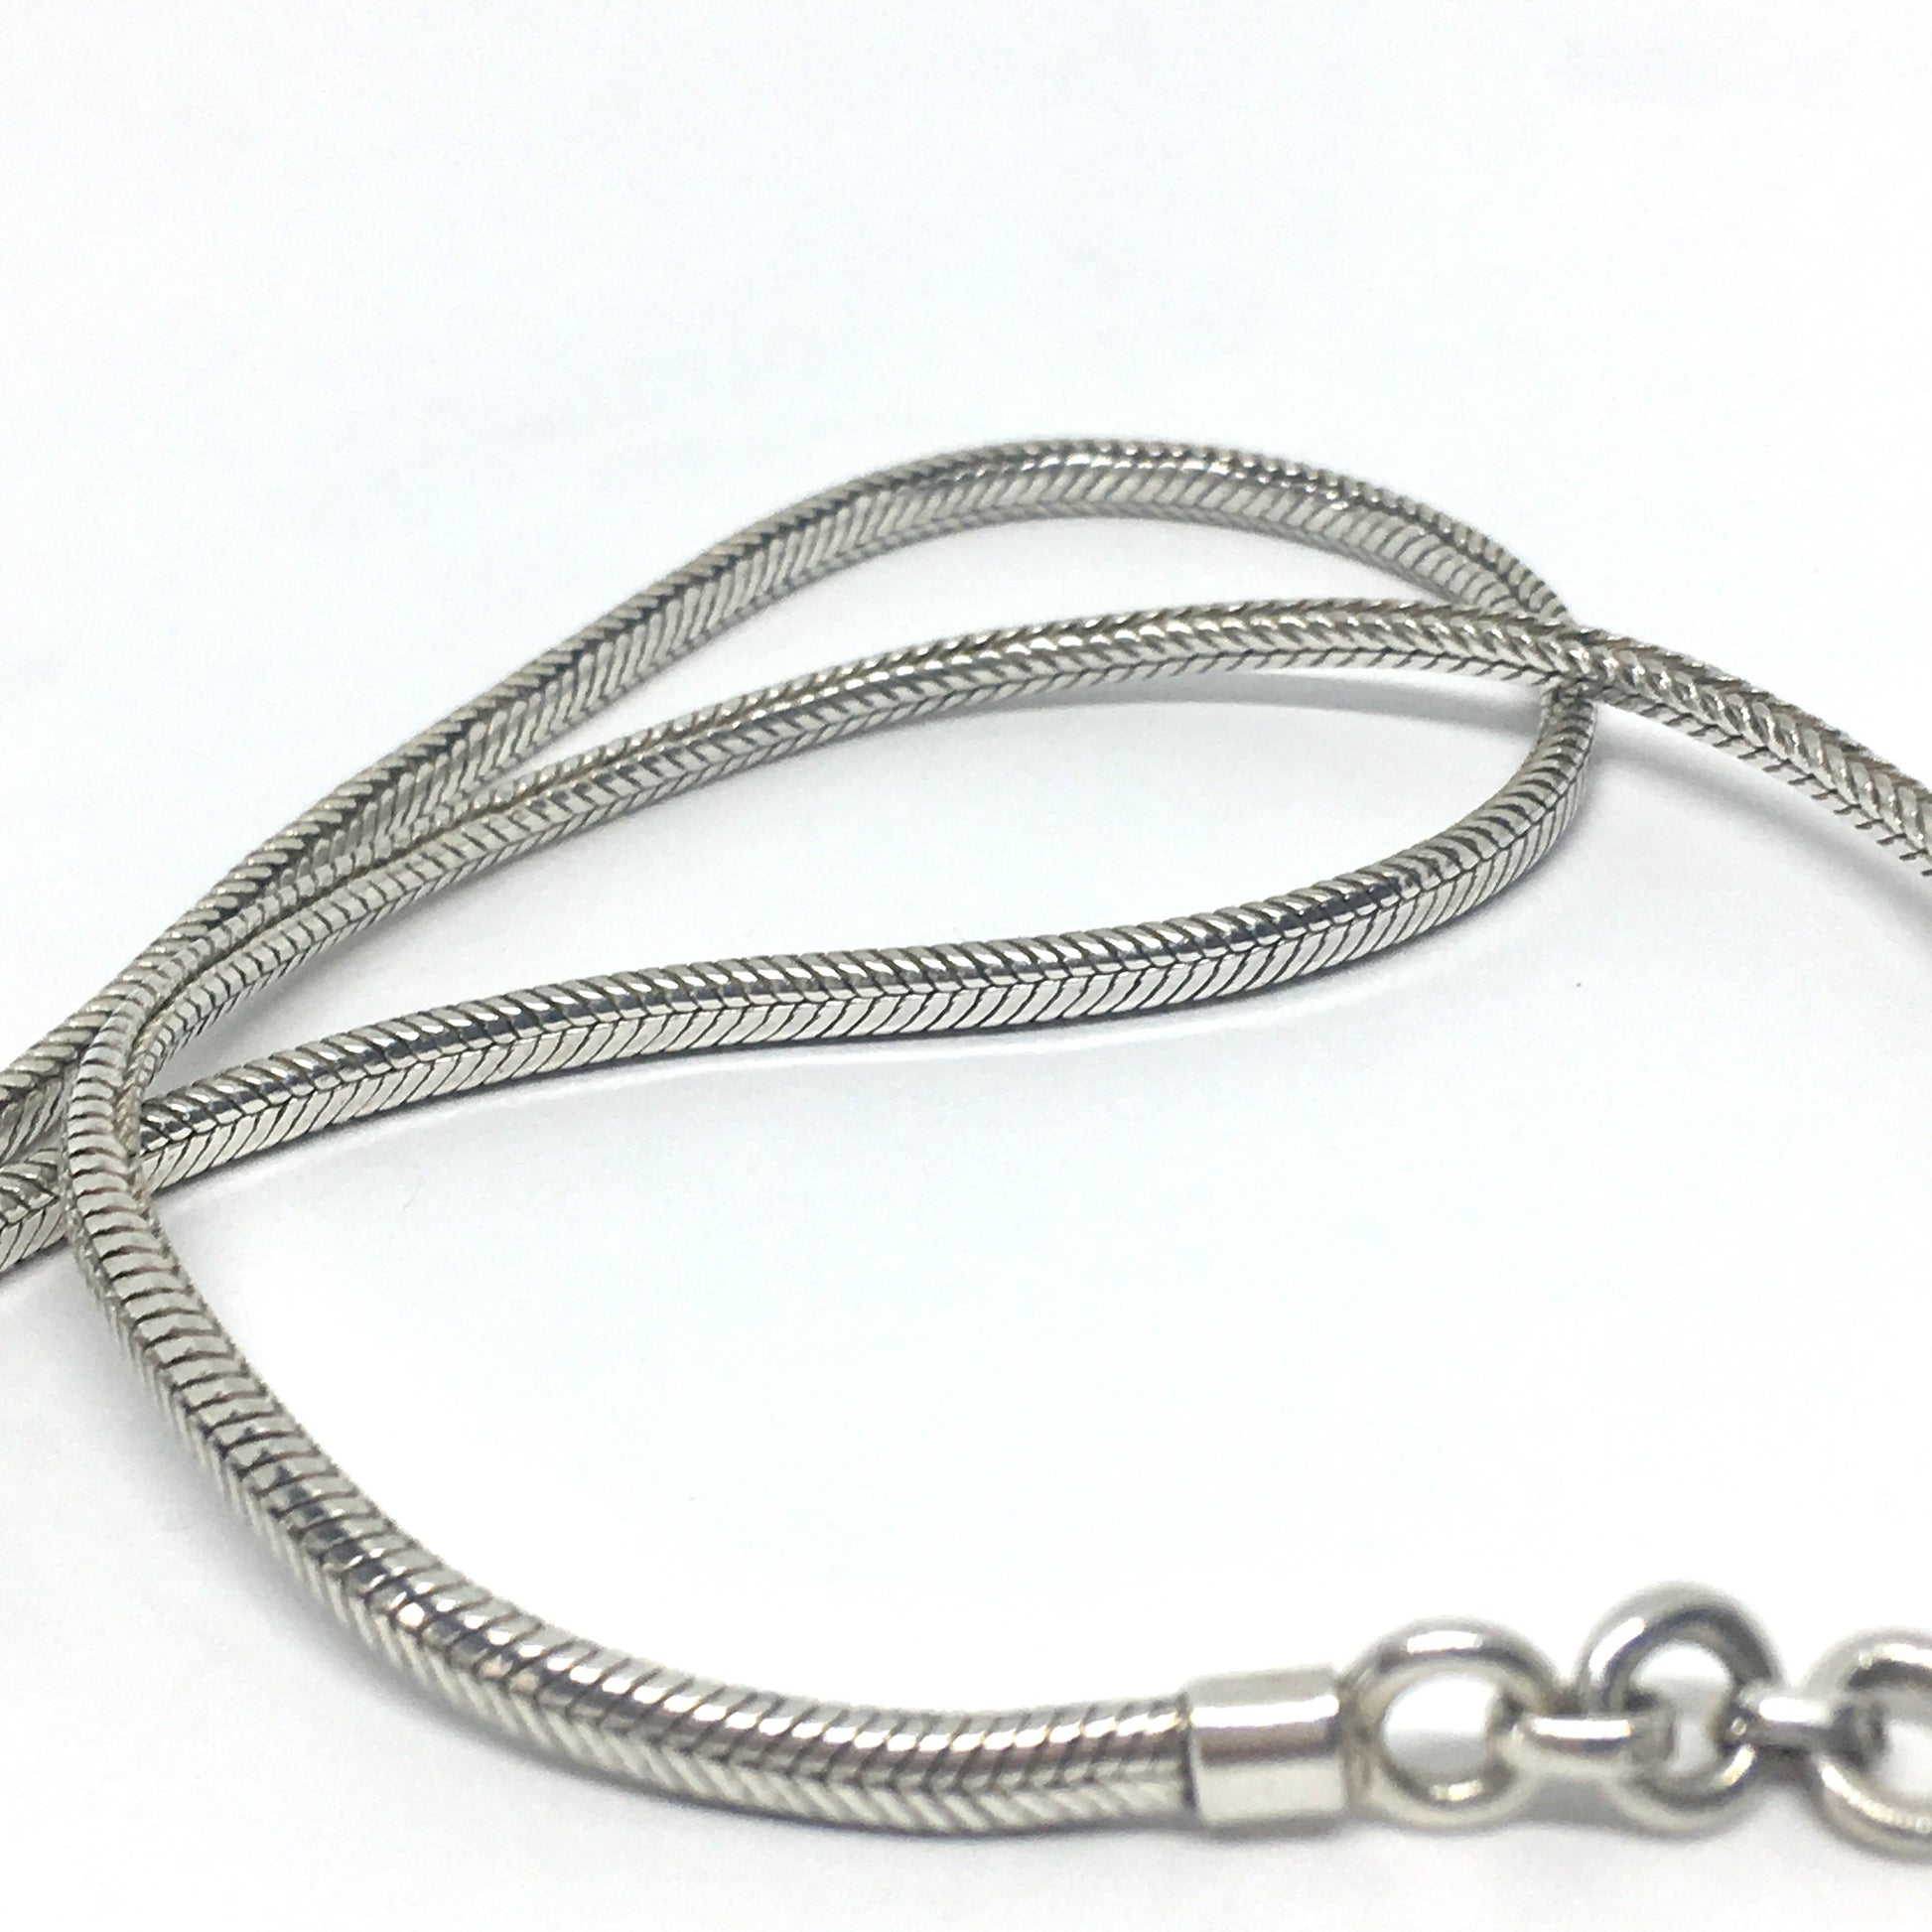 Silver Snake Chain Mens Silver Chain Necklace Mens Chain Stainless Steel Snake  Necklace 3mm, Mens Jewellery by Twistedpendant 